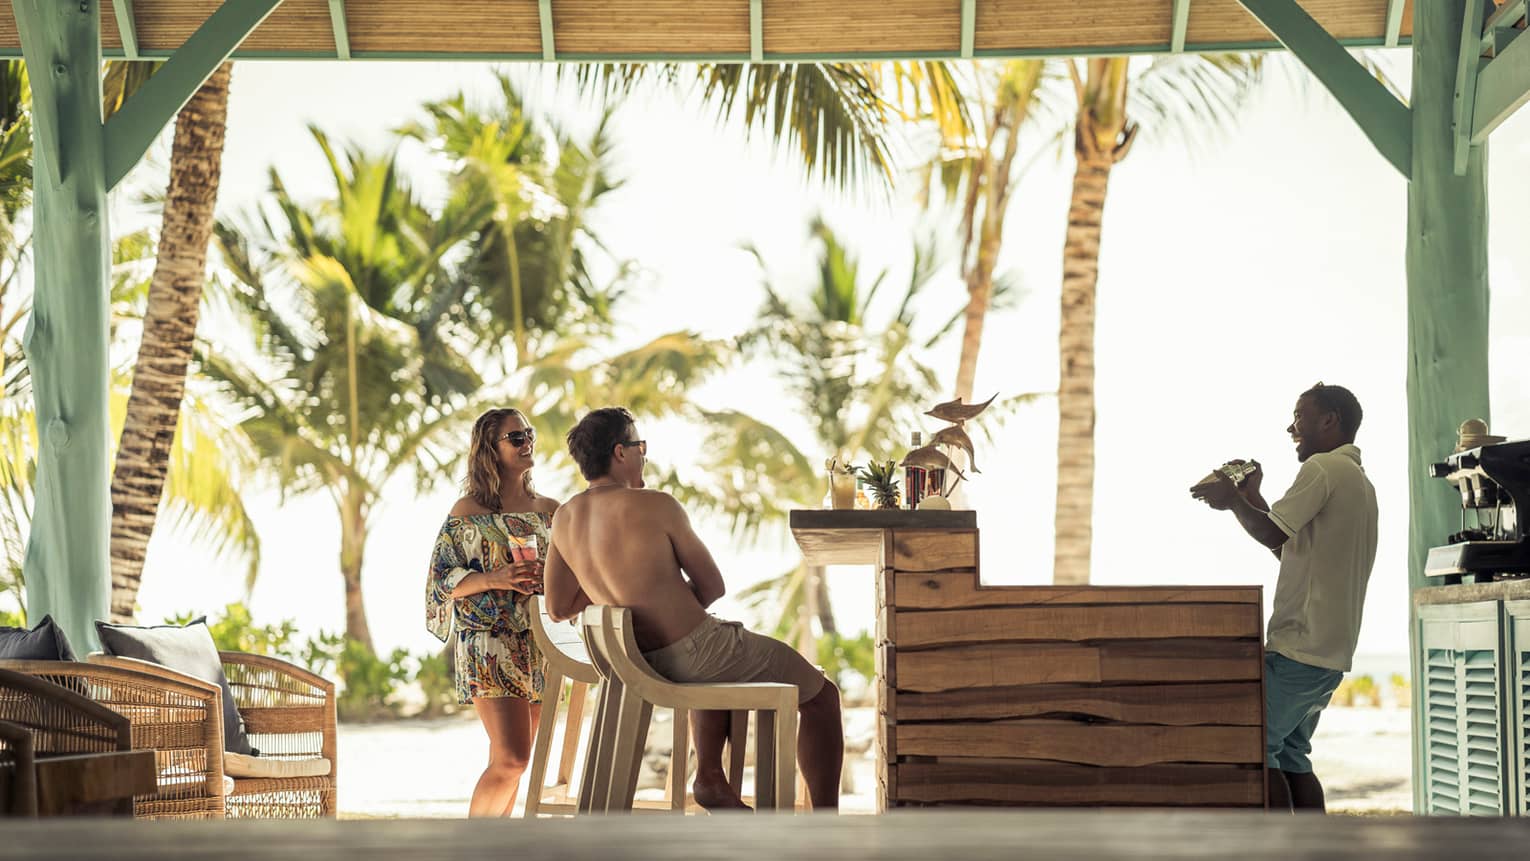 Couple in beach wear laugh with bartender who shakes cocktail in thatched roof bar